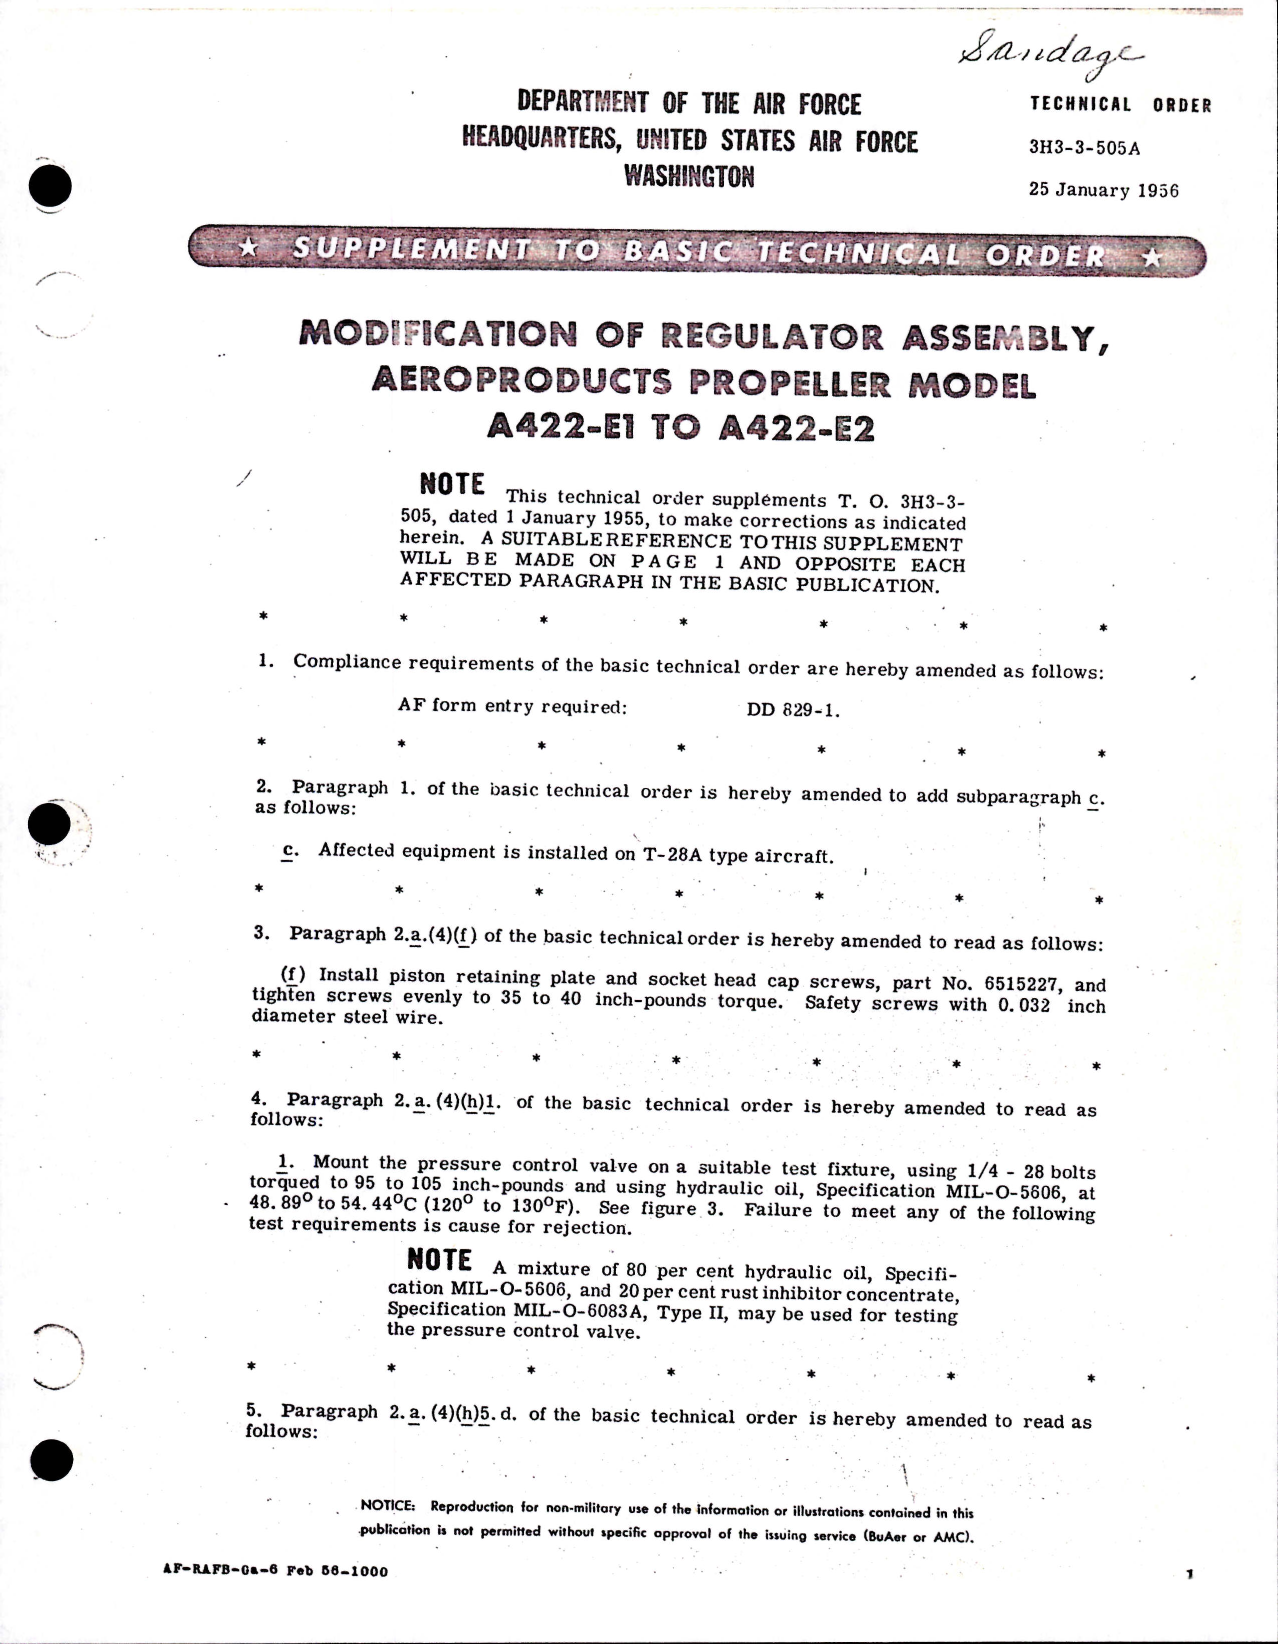 Sample page 1 from AirCorps Library document: Modification of Regulator Assembly for Aeroproducts Propeller Model A422-E1 to A422-E2